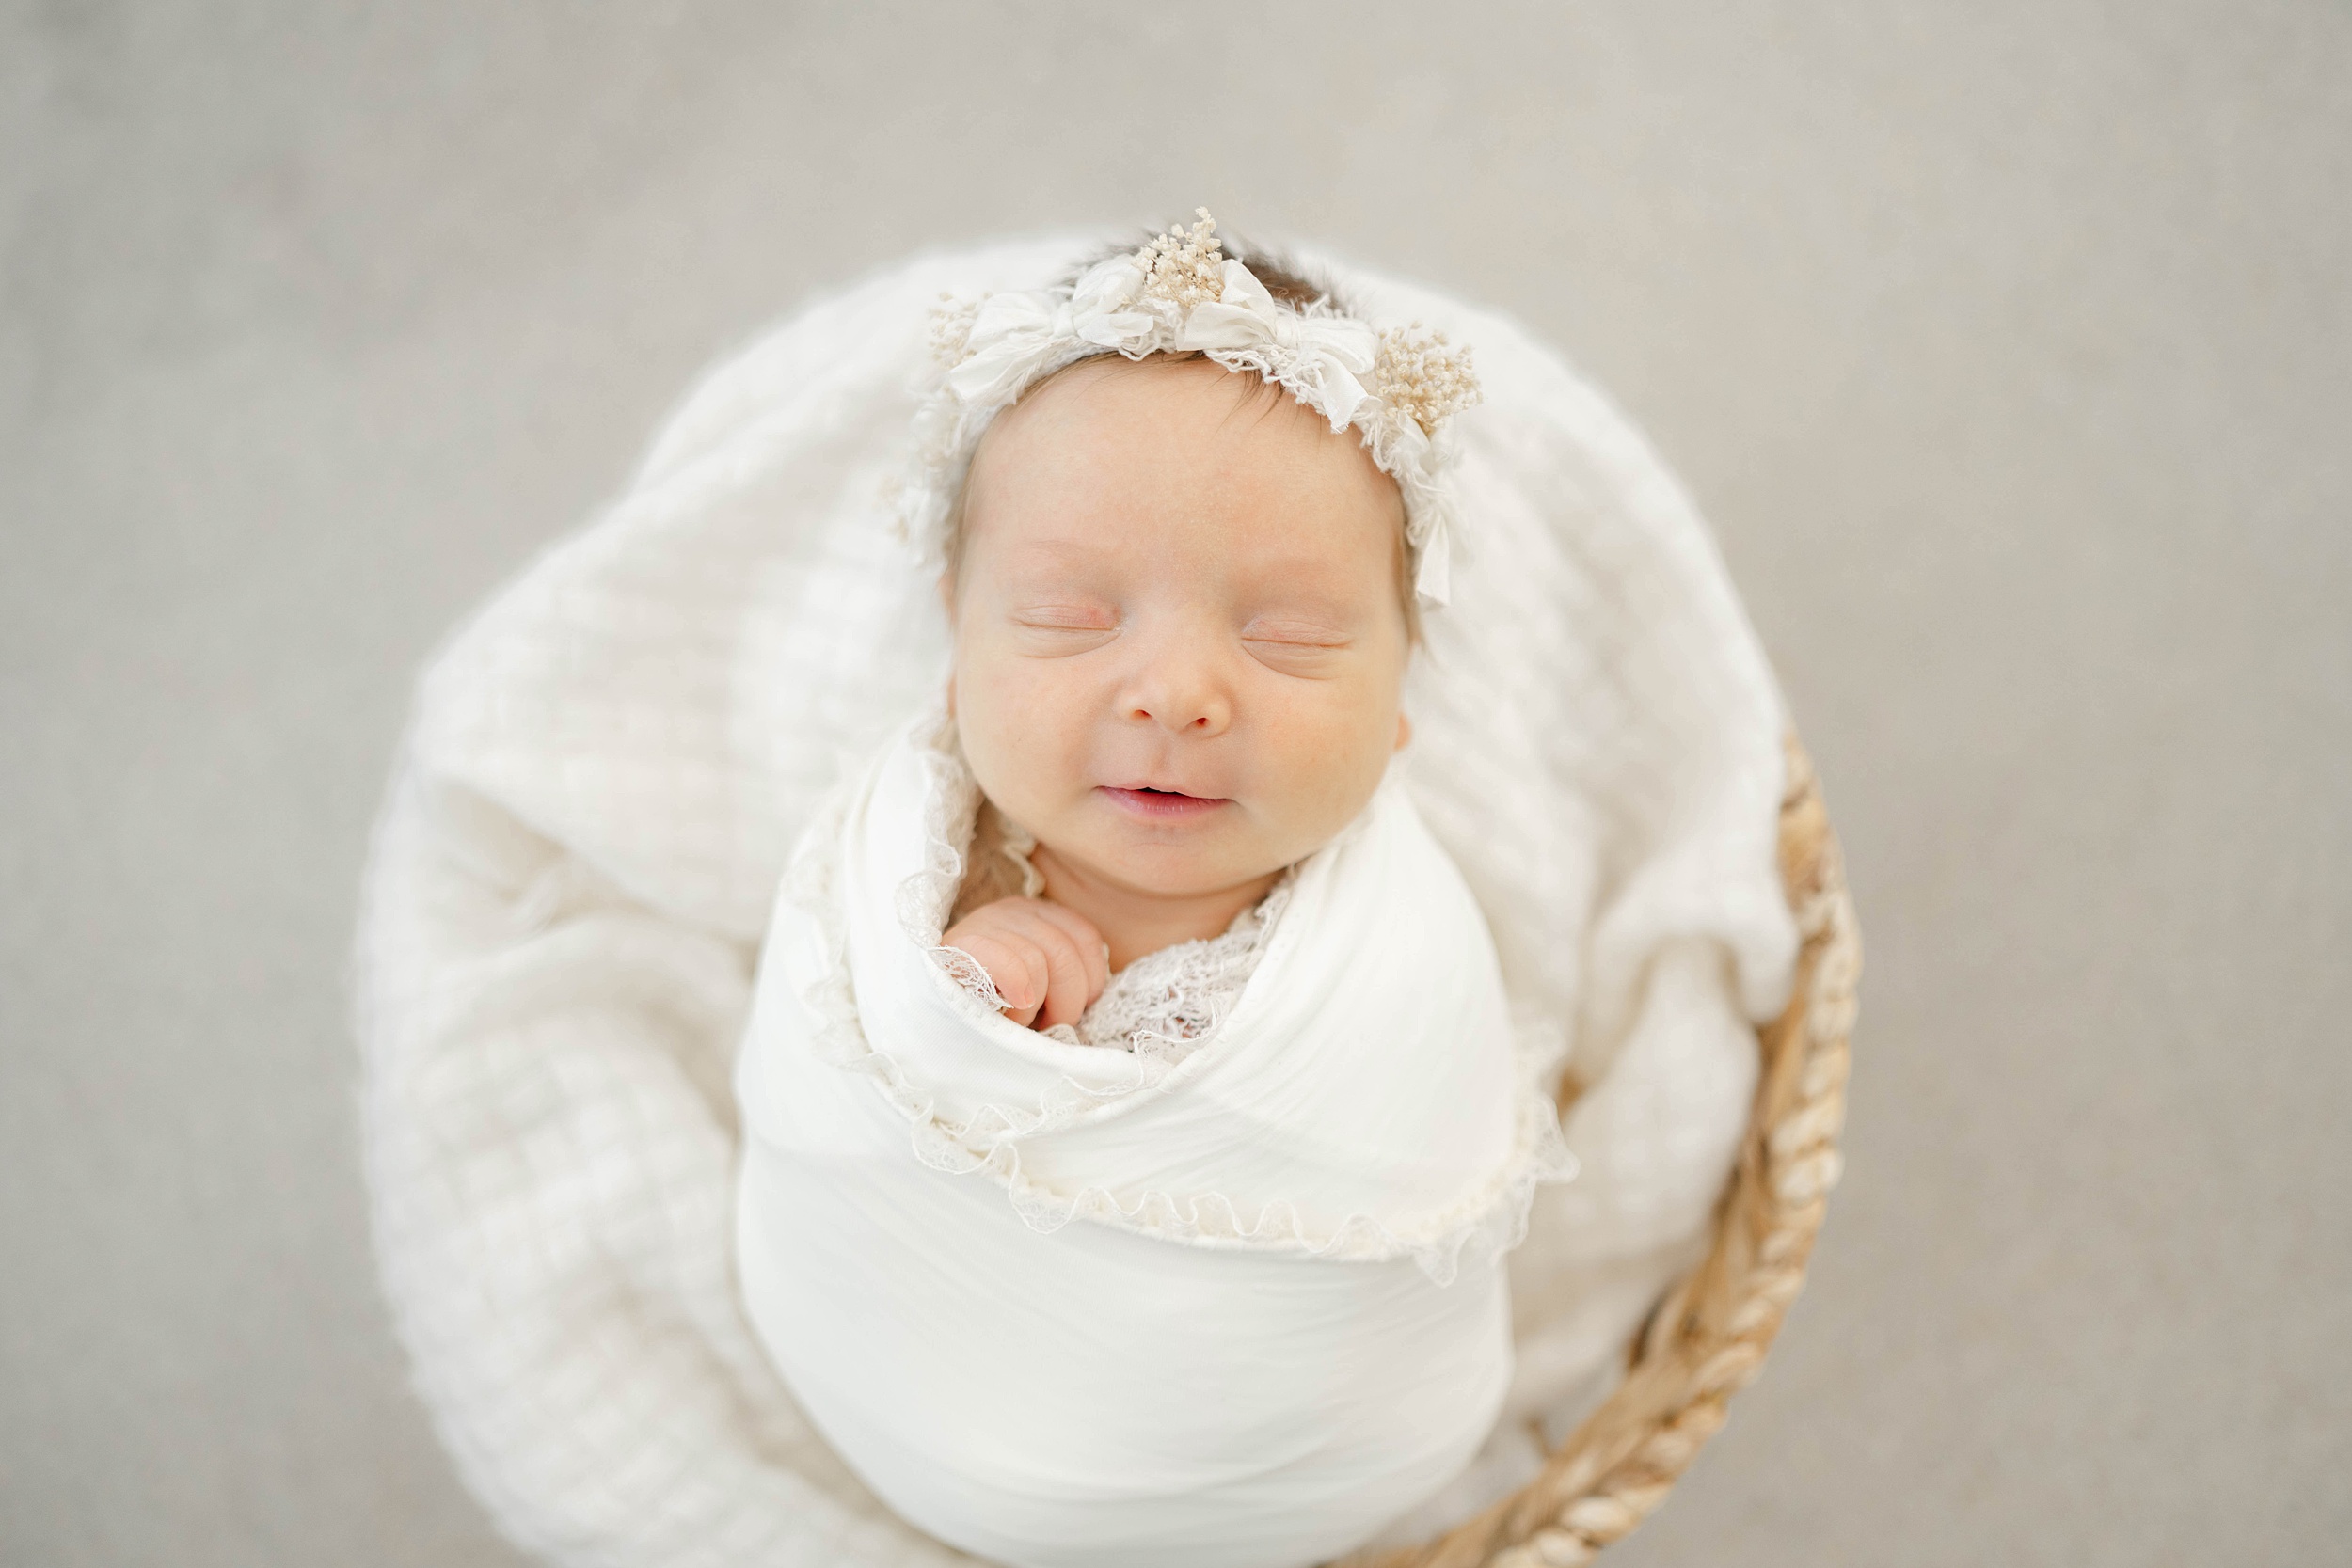 A newborn baby girl sleeps in a white swaddle in a woven basket